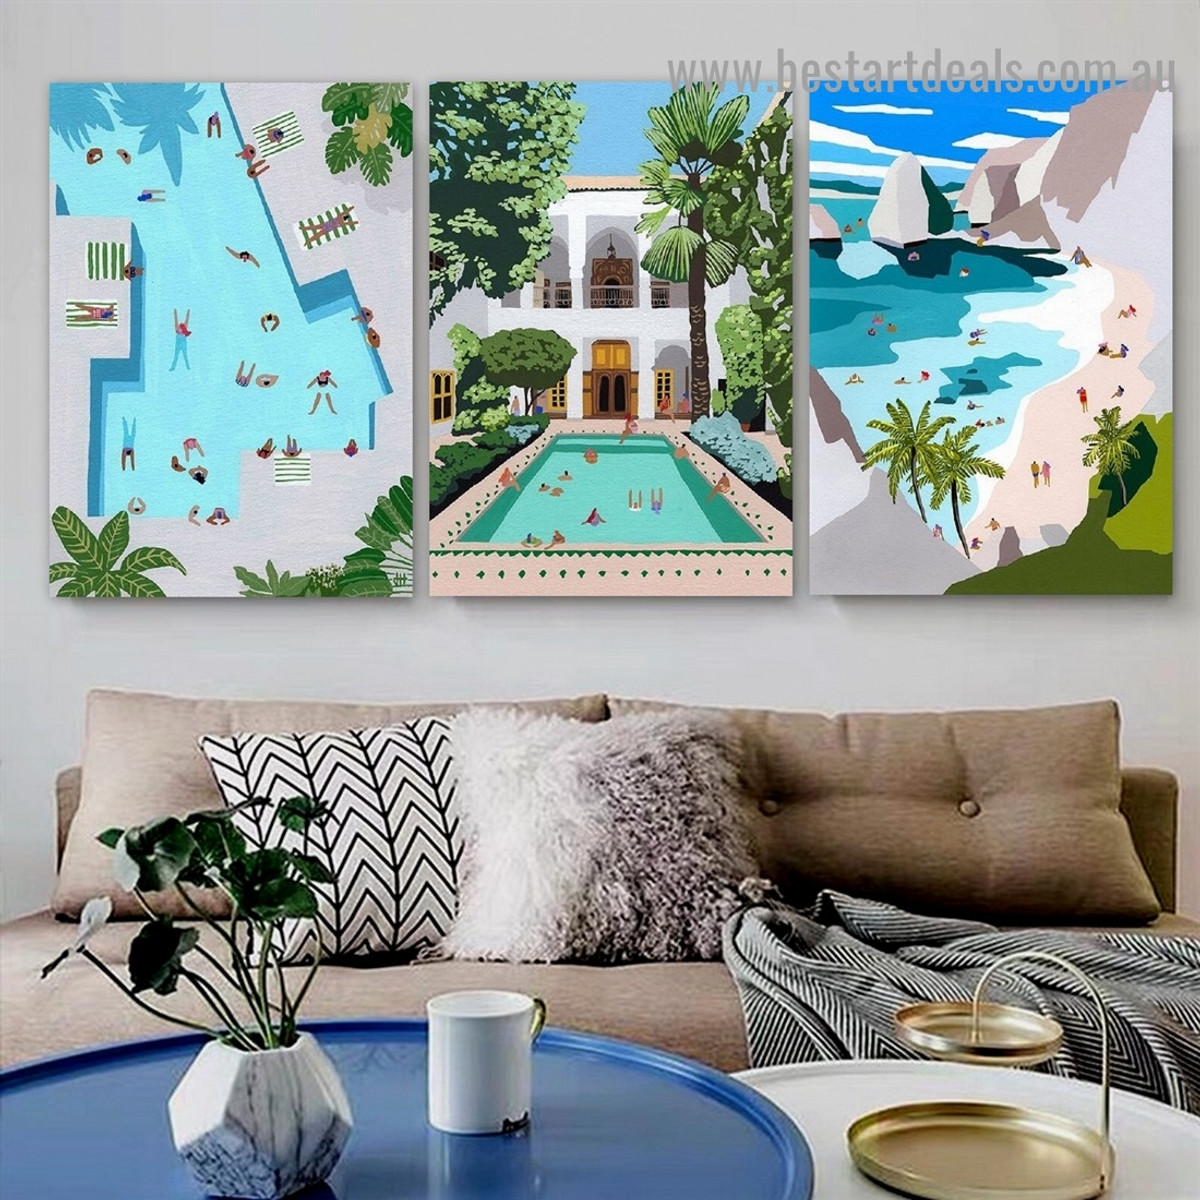 Indoor Swimming Pool Architecture Illustration Modern Framed Artwork Photo Canvas Print for Room Wall Garniture